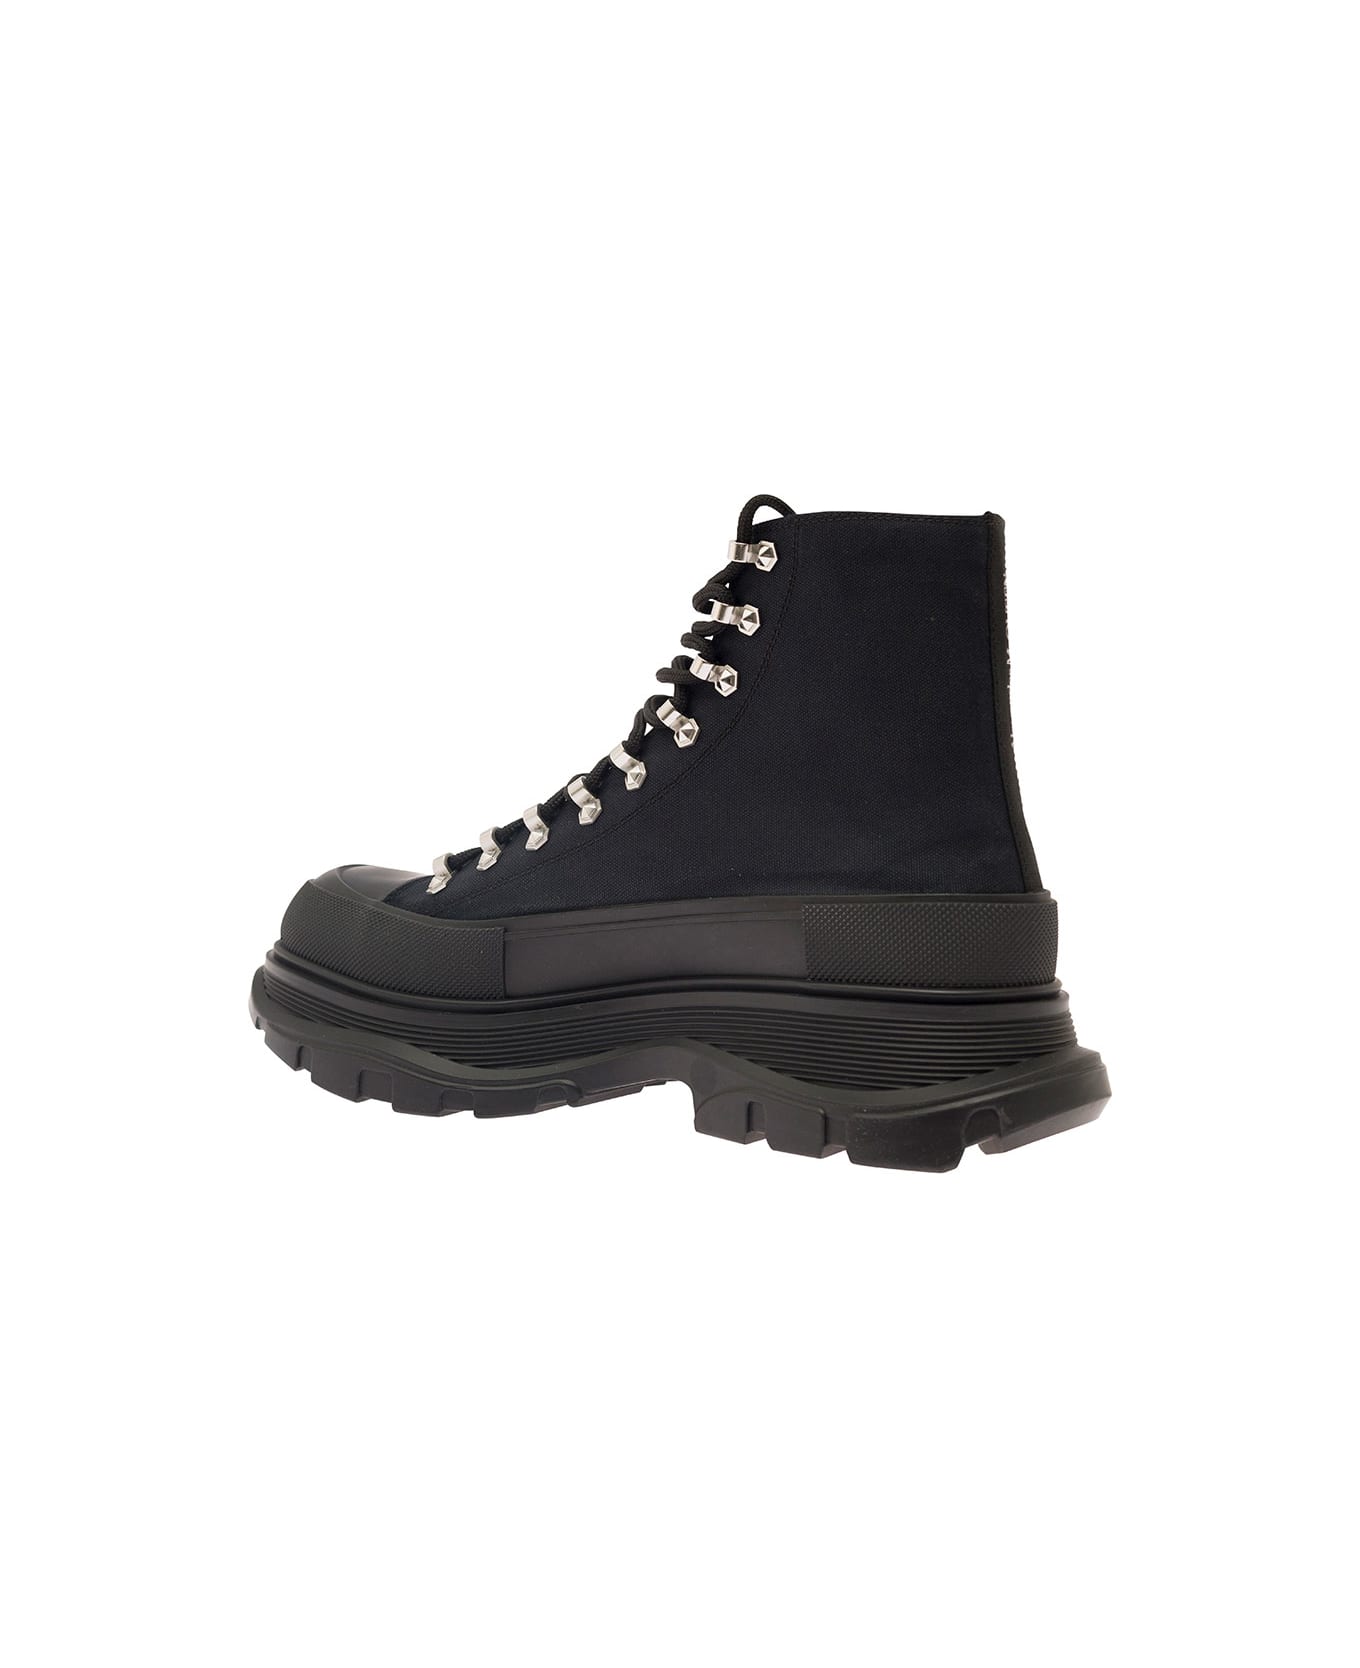 Alexander McQueen 'trade Slick' Black Lace-up Boots With Thread Sole In Canvas Man - Black